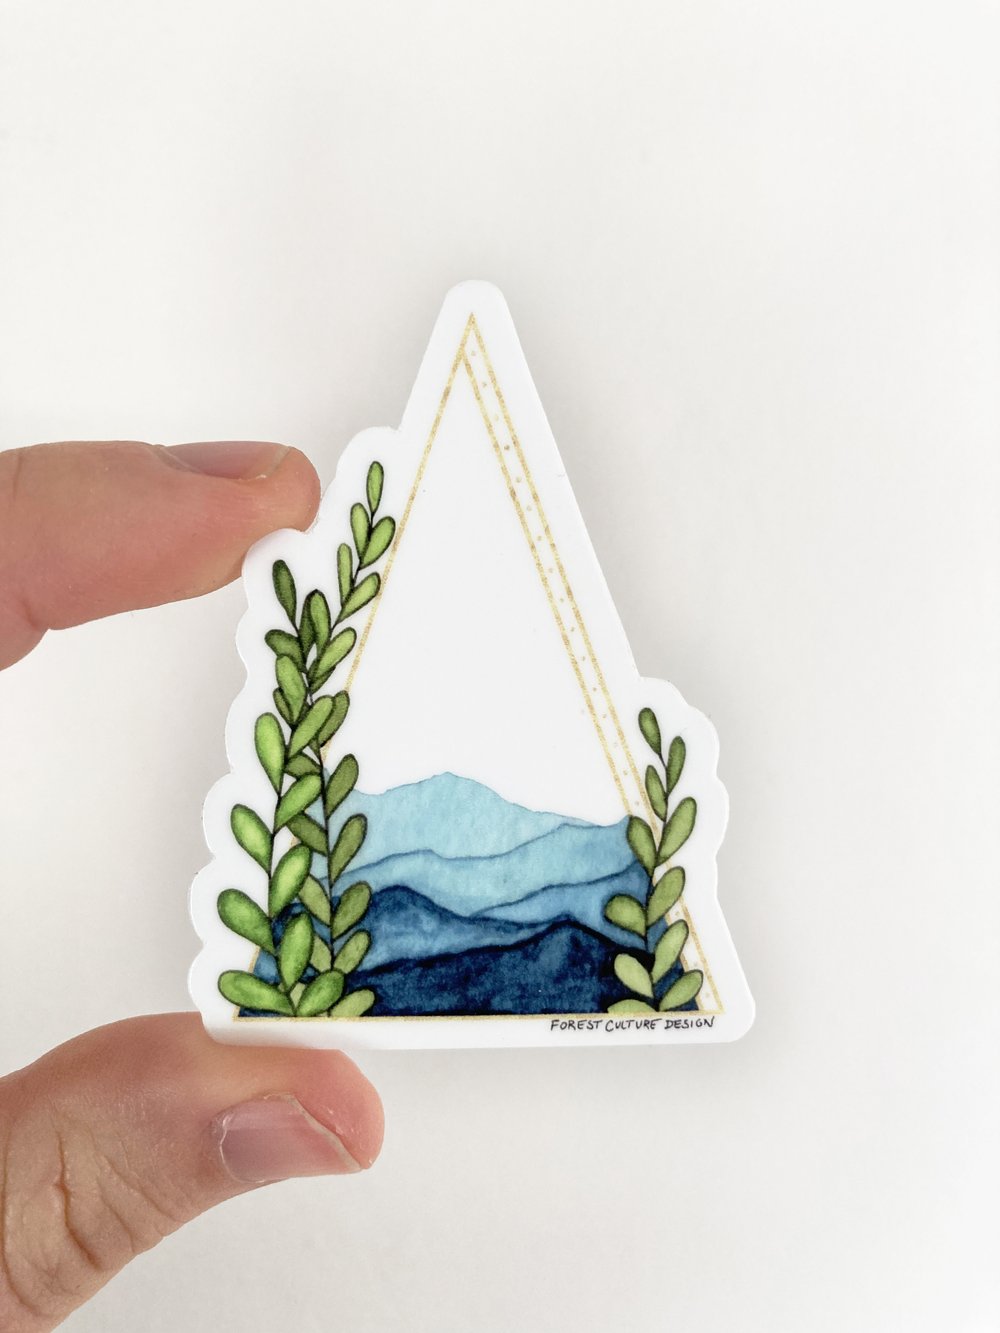 Highs and Lows Mountain Sticker